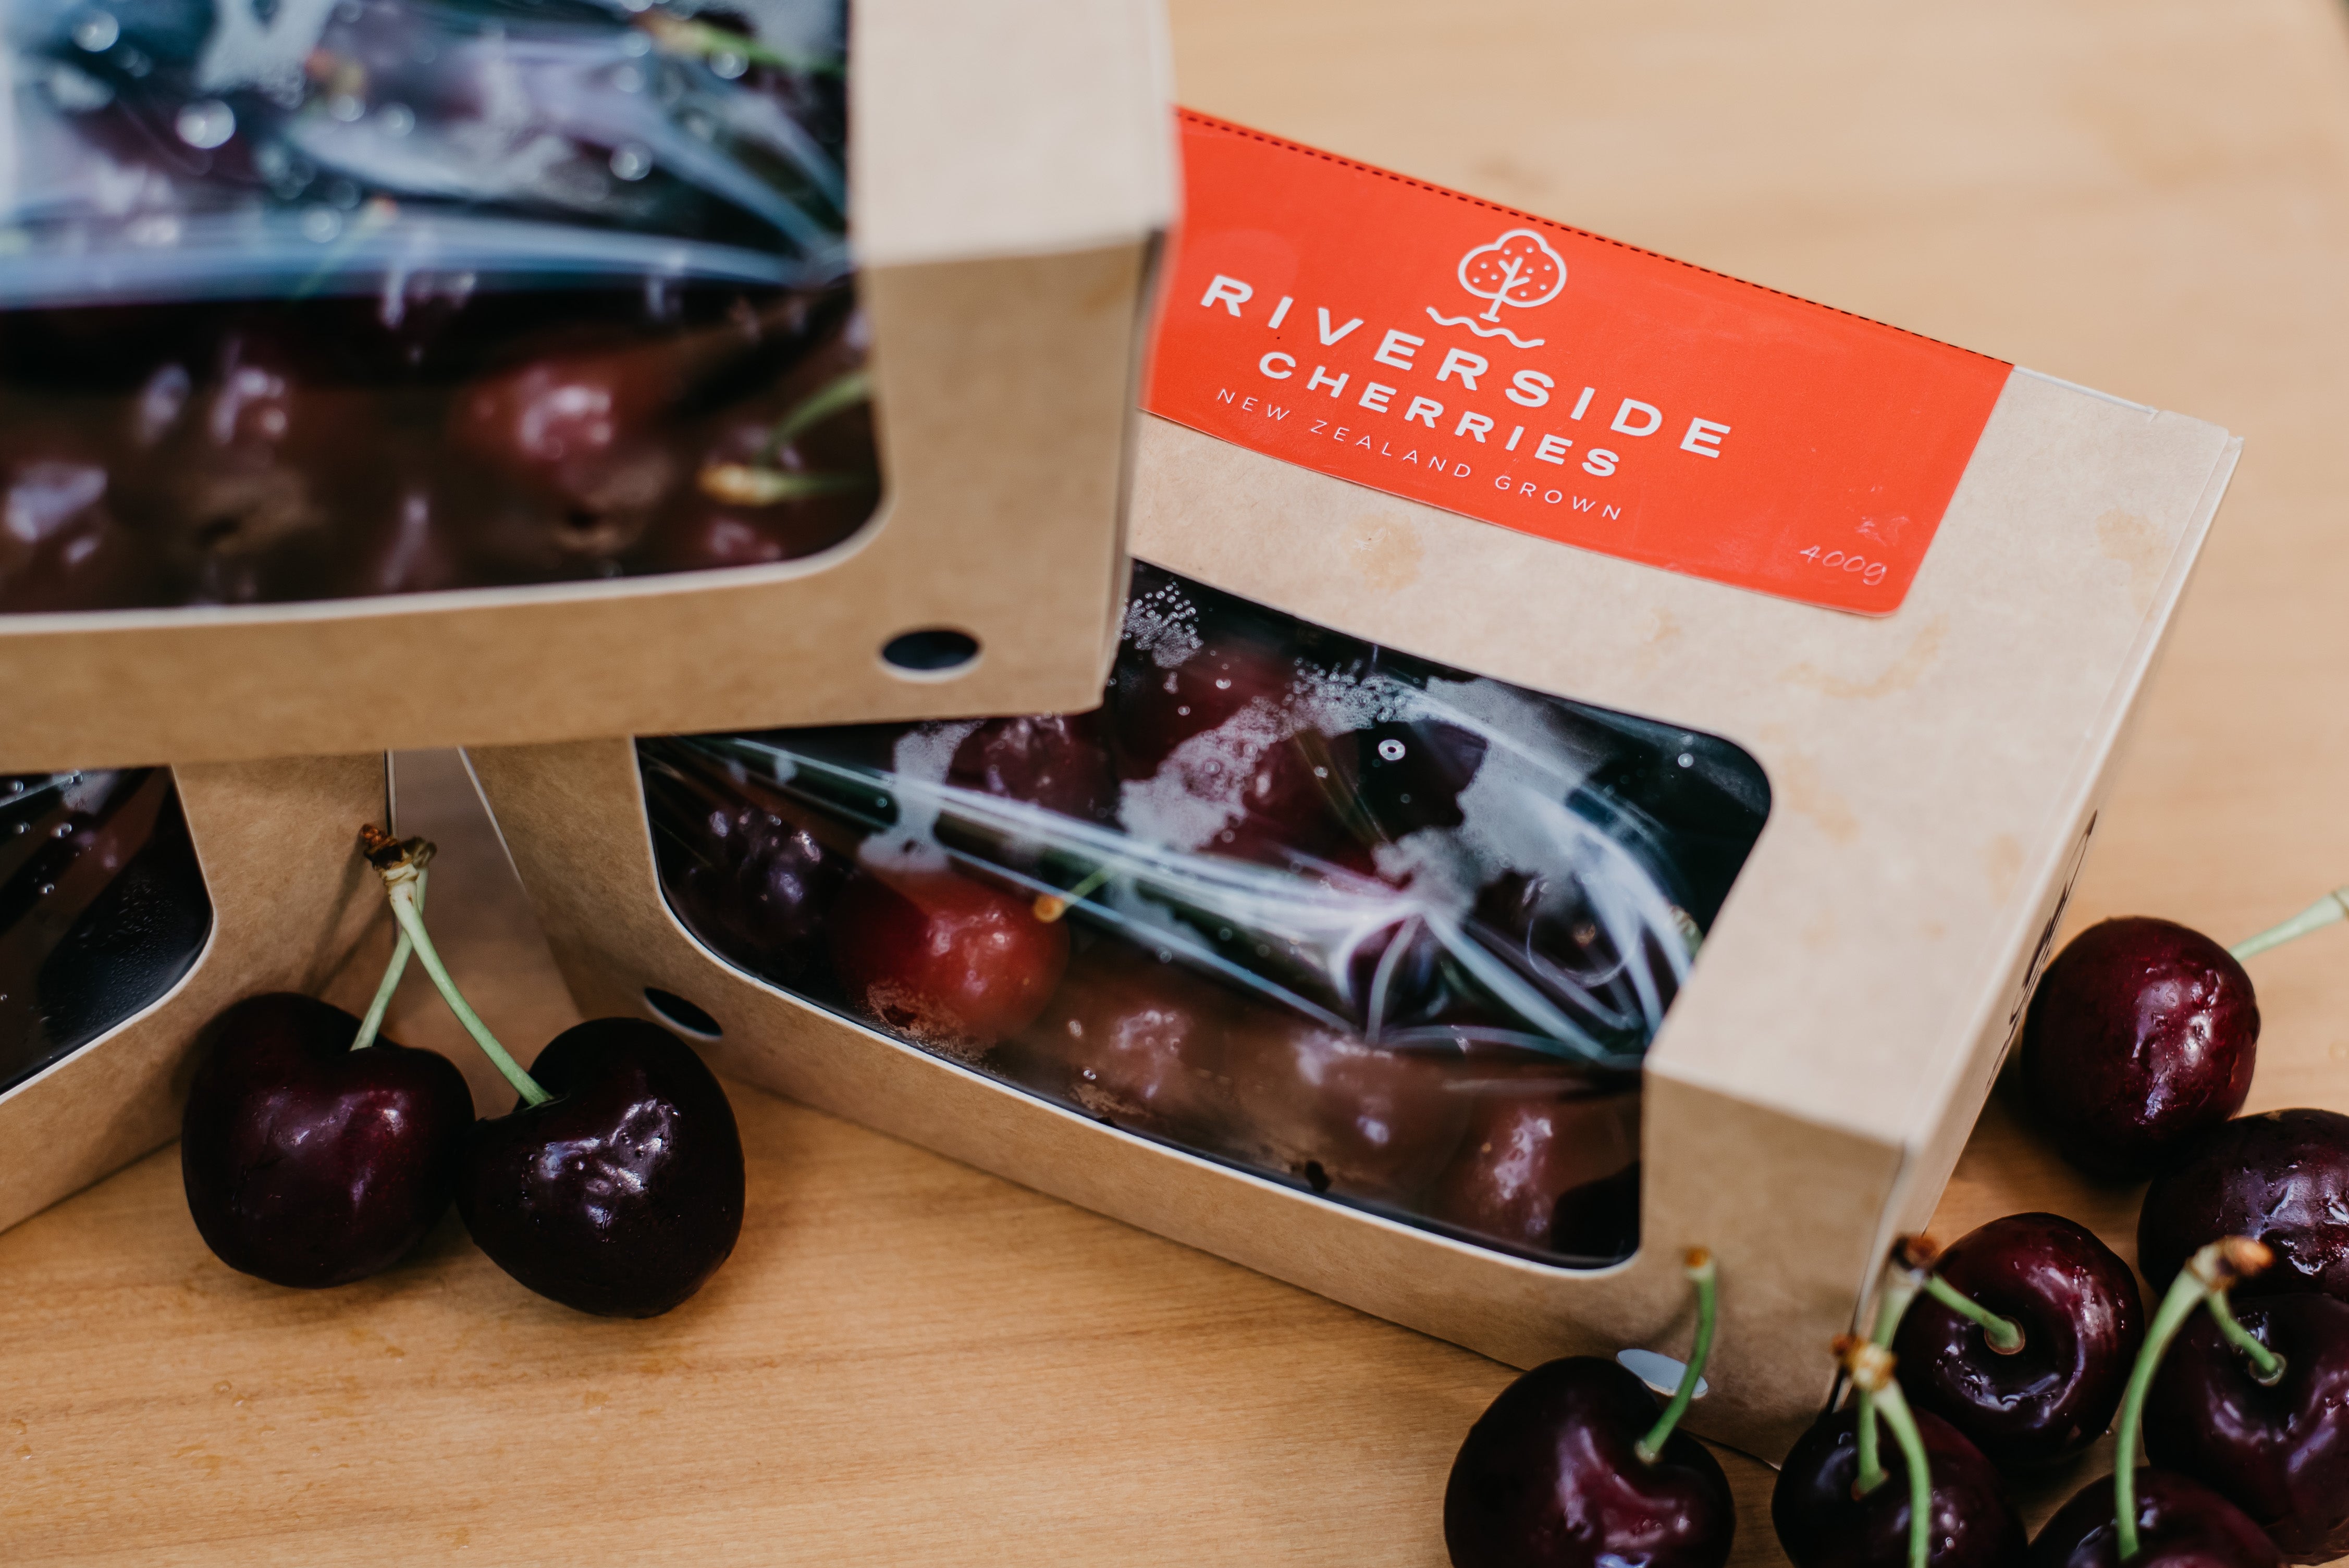 Cherries - Limited edition gift boxes